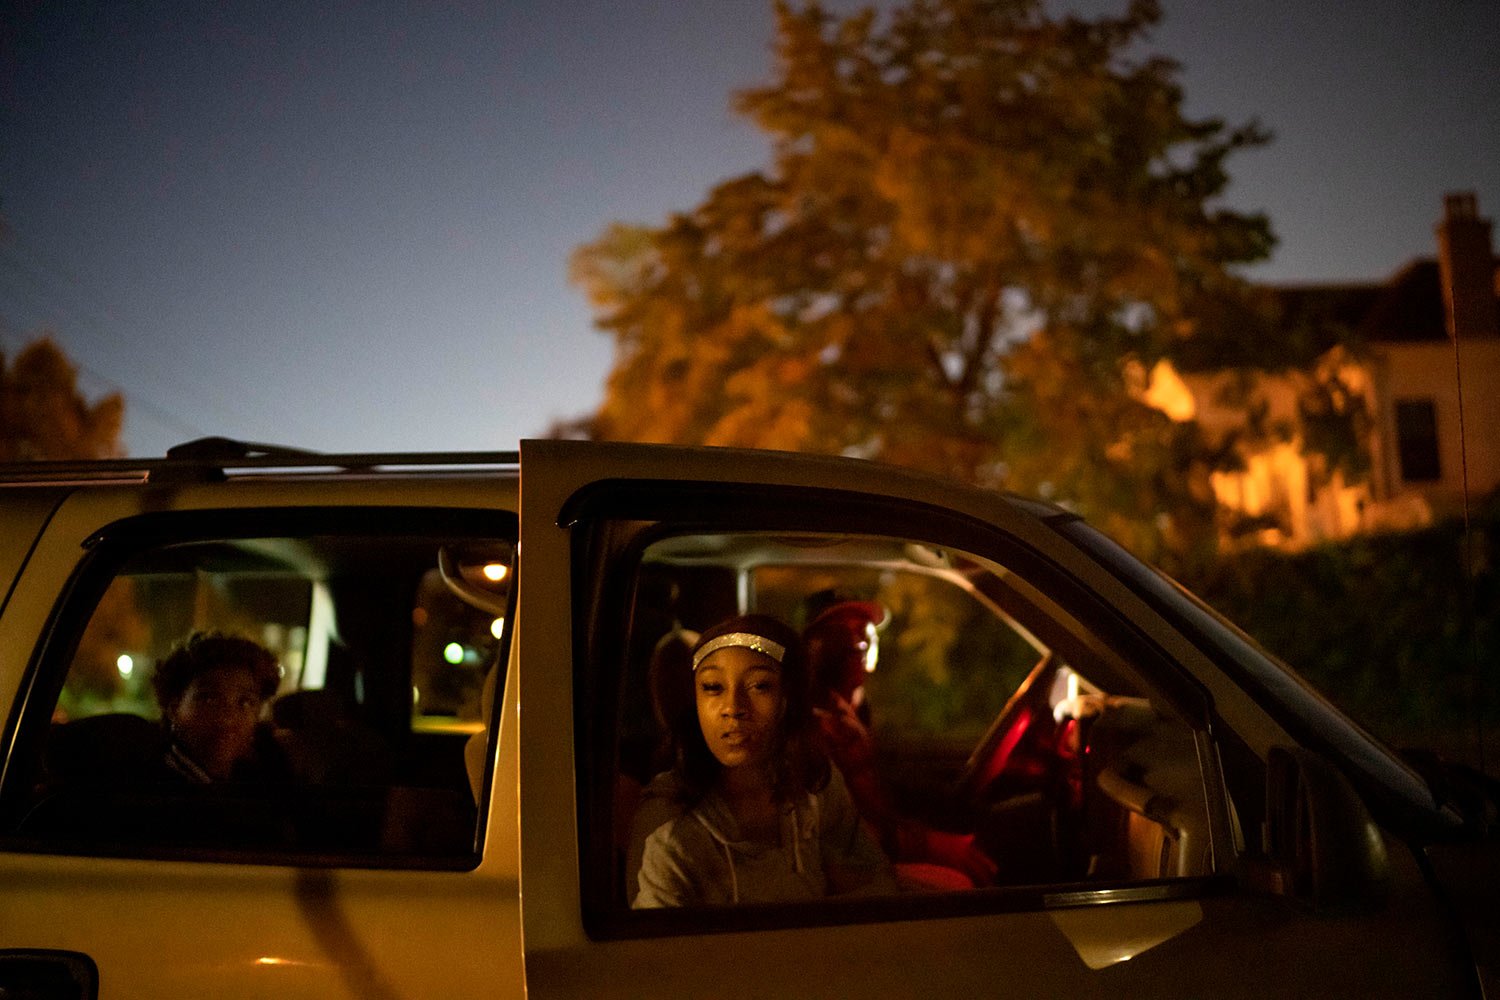  Victoria Gwynn, 21, waits in the car with her father, Navada, right, and sister, also named Nevada, 15, left, for a bus to take her to work at dawn in Louisville, Ky, Tuesday, Aug. 29, 2023. (AP Photo/David Goldman)  